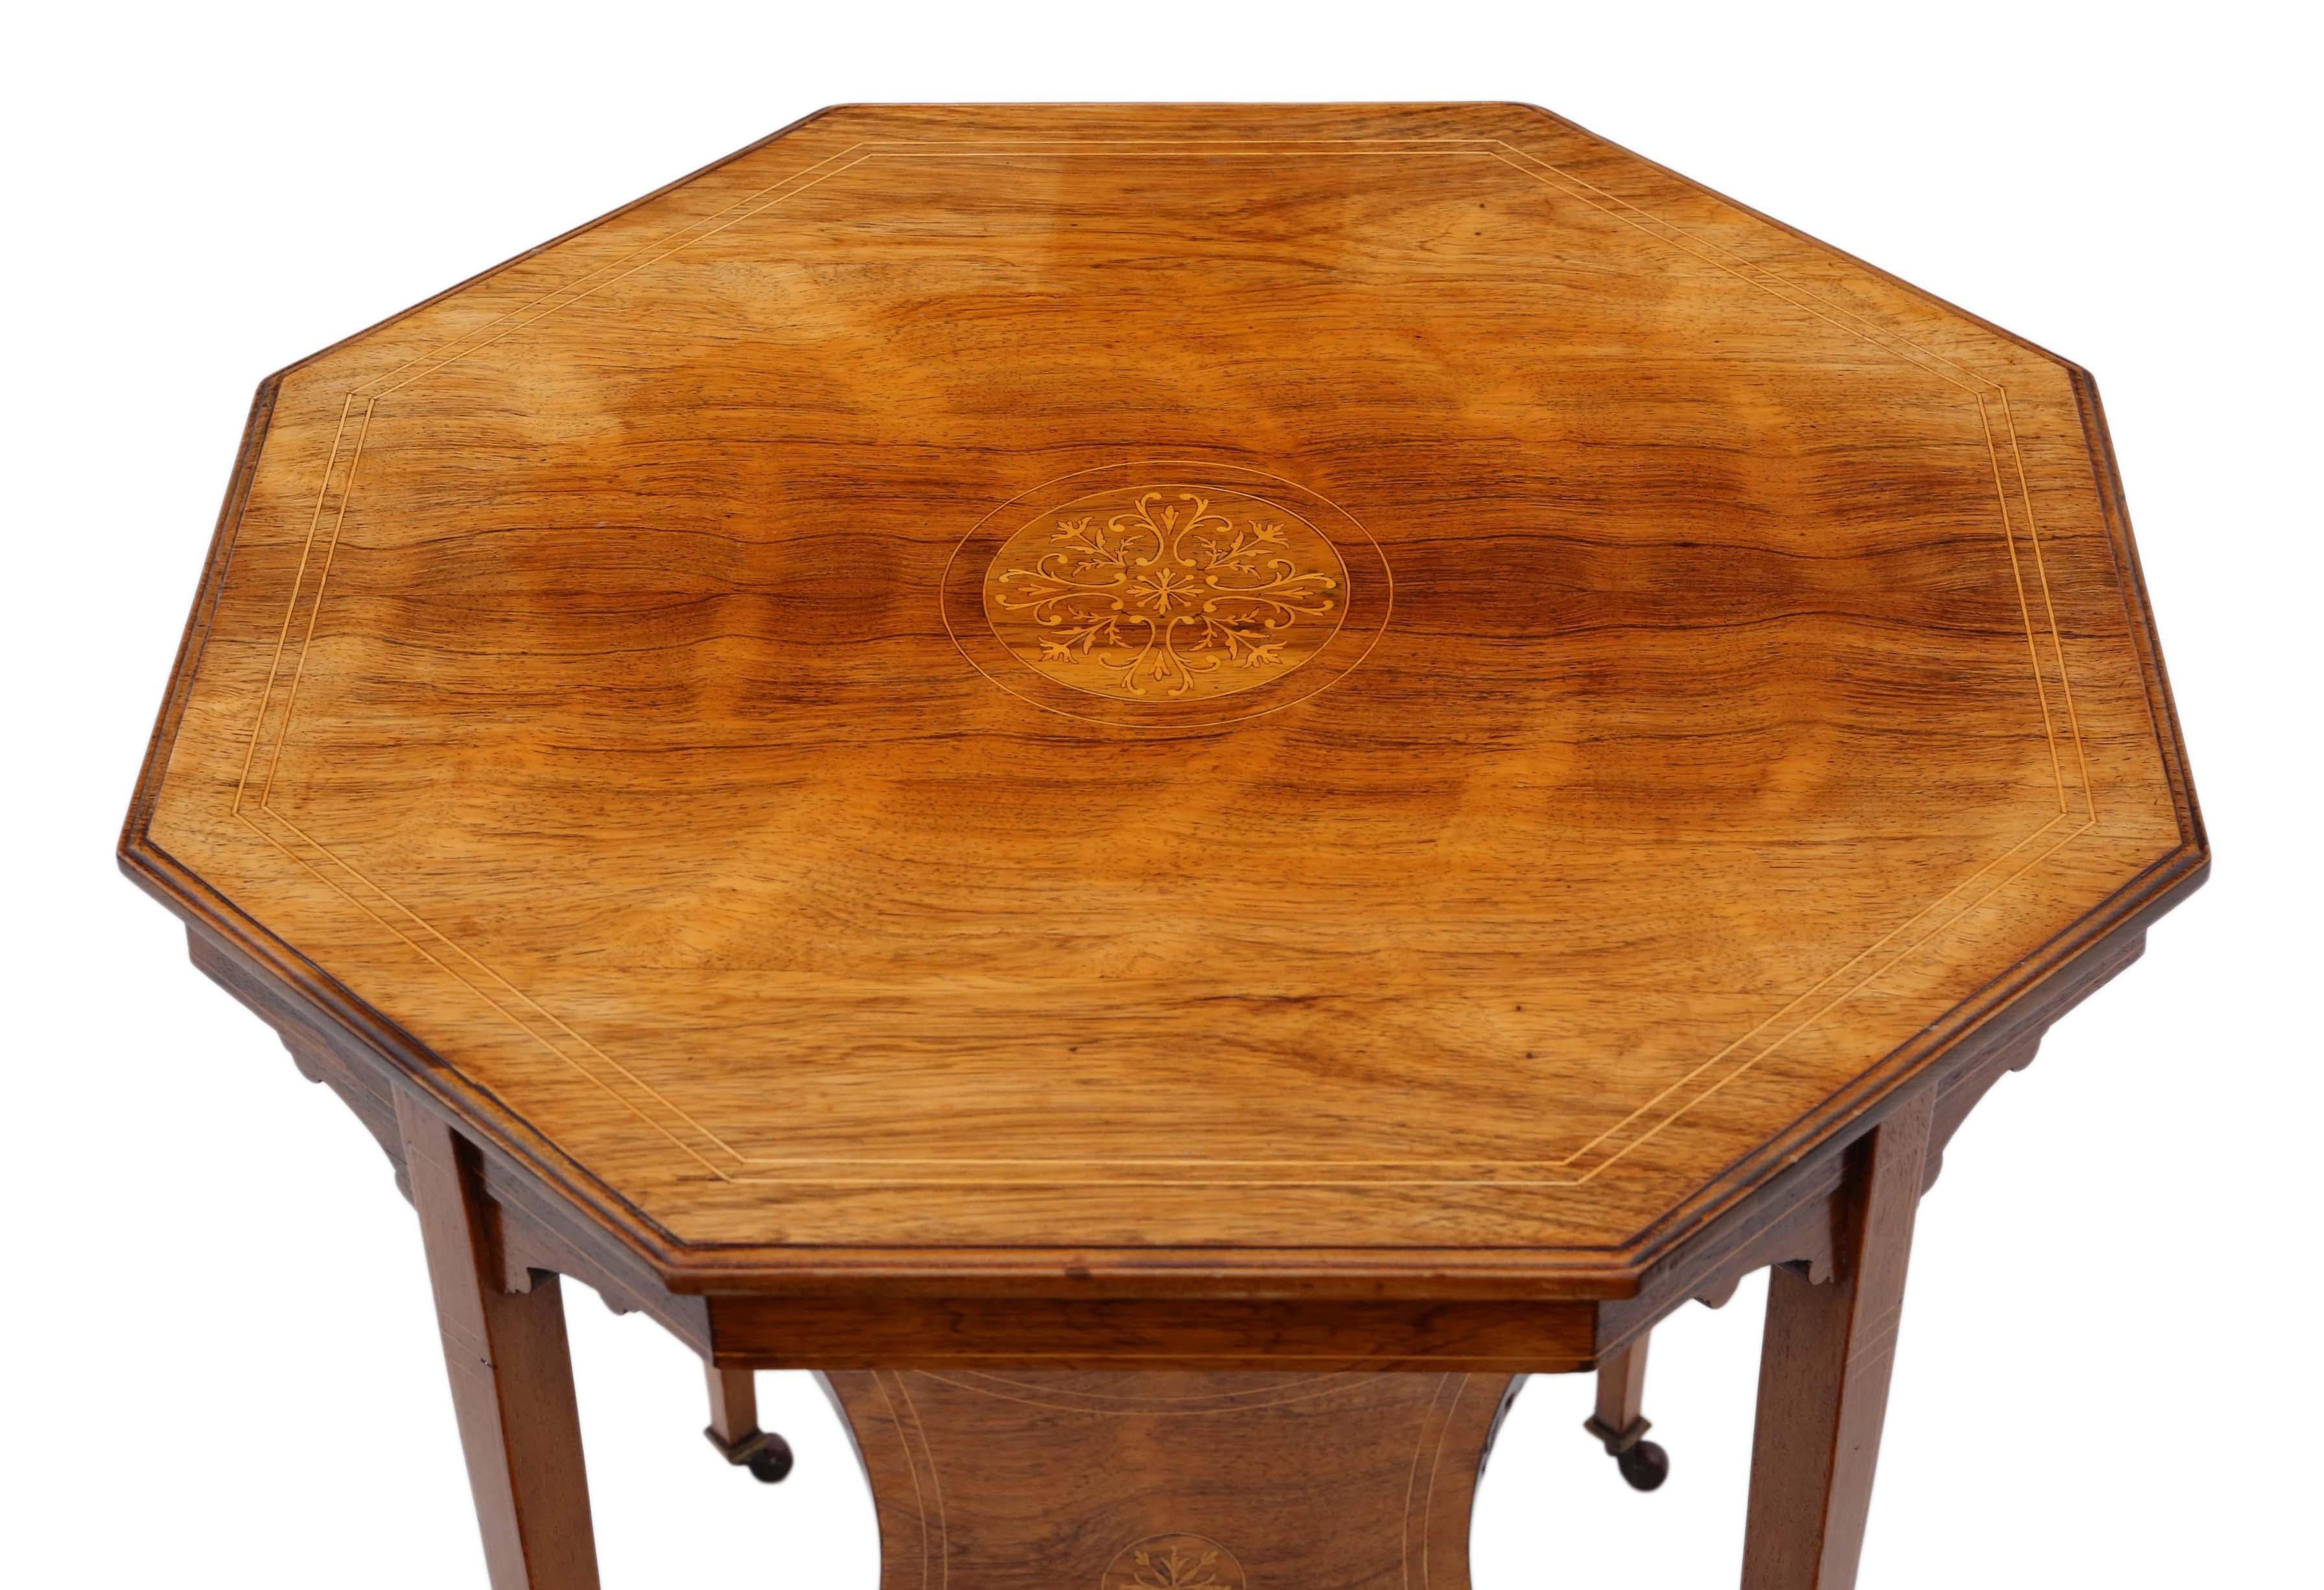 Antique fine quality inlaid Victorian 19th century inlaid rosewood octagonal centre, window, side or occasional table. C1895.

No loose joints and no woodworm. A rare decorative find, with a lovely light colour, shaped under tier and marquetry